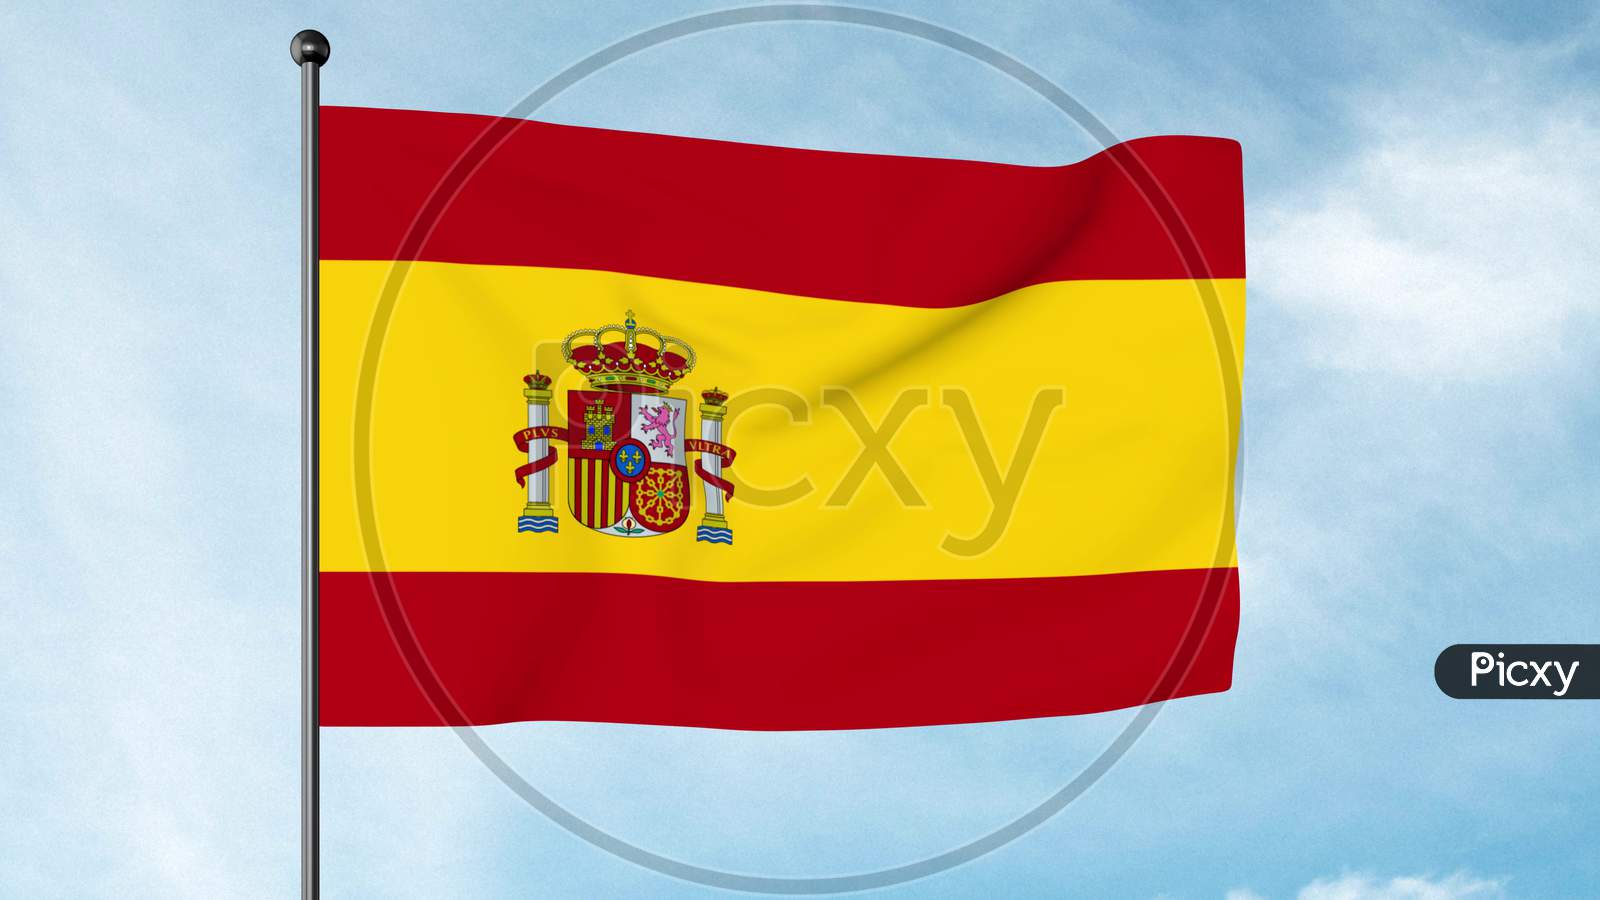 3D Illustration Of The Flag Of Spain Consists Of Three Horizontal Stripes: Red, Yellow And Red, The Yellow Stripe Being Twice The Size Of Each Red Stripe, La Rojigualda.